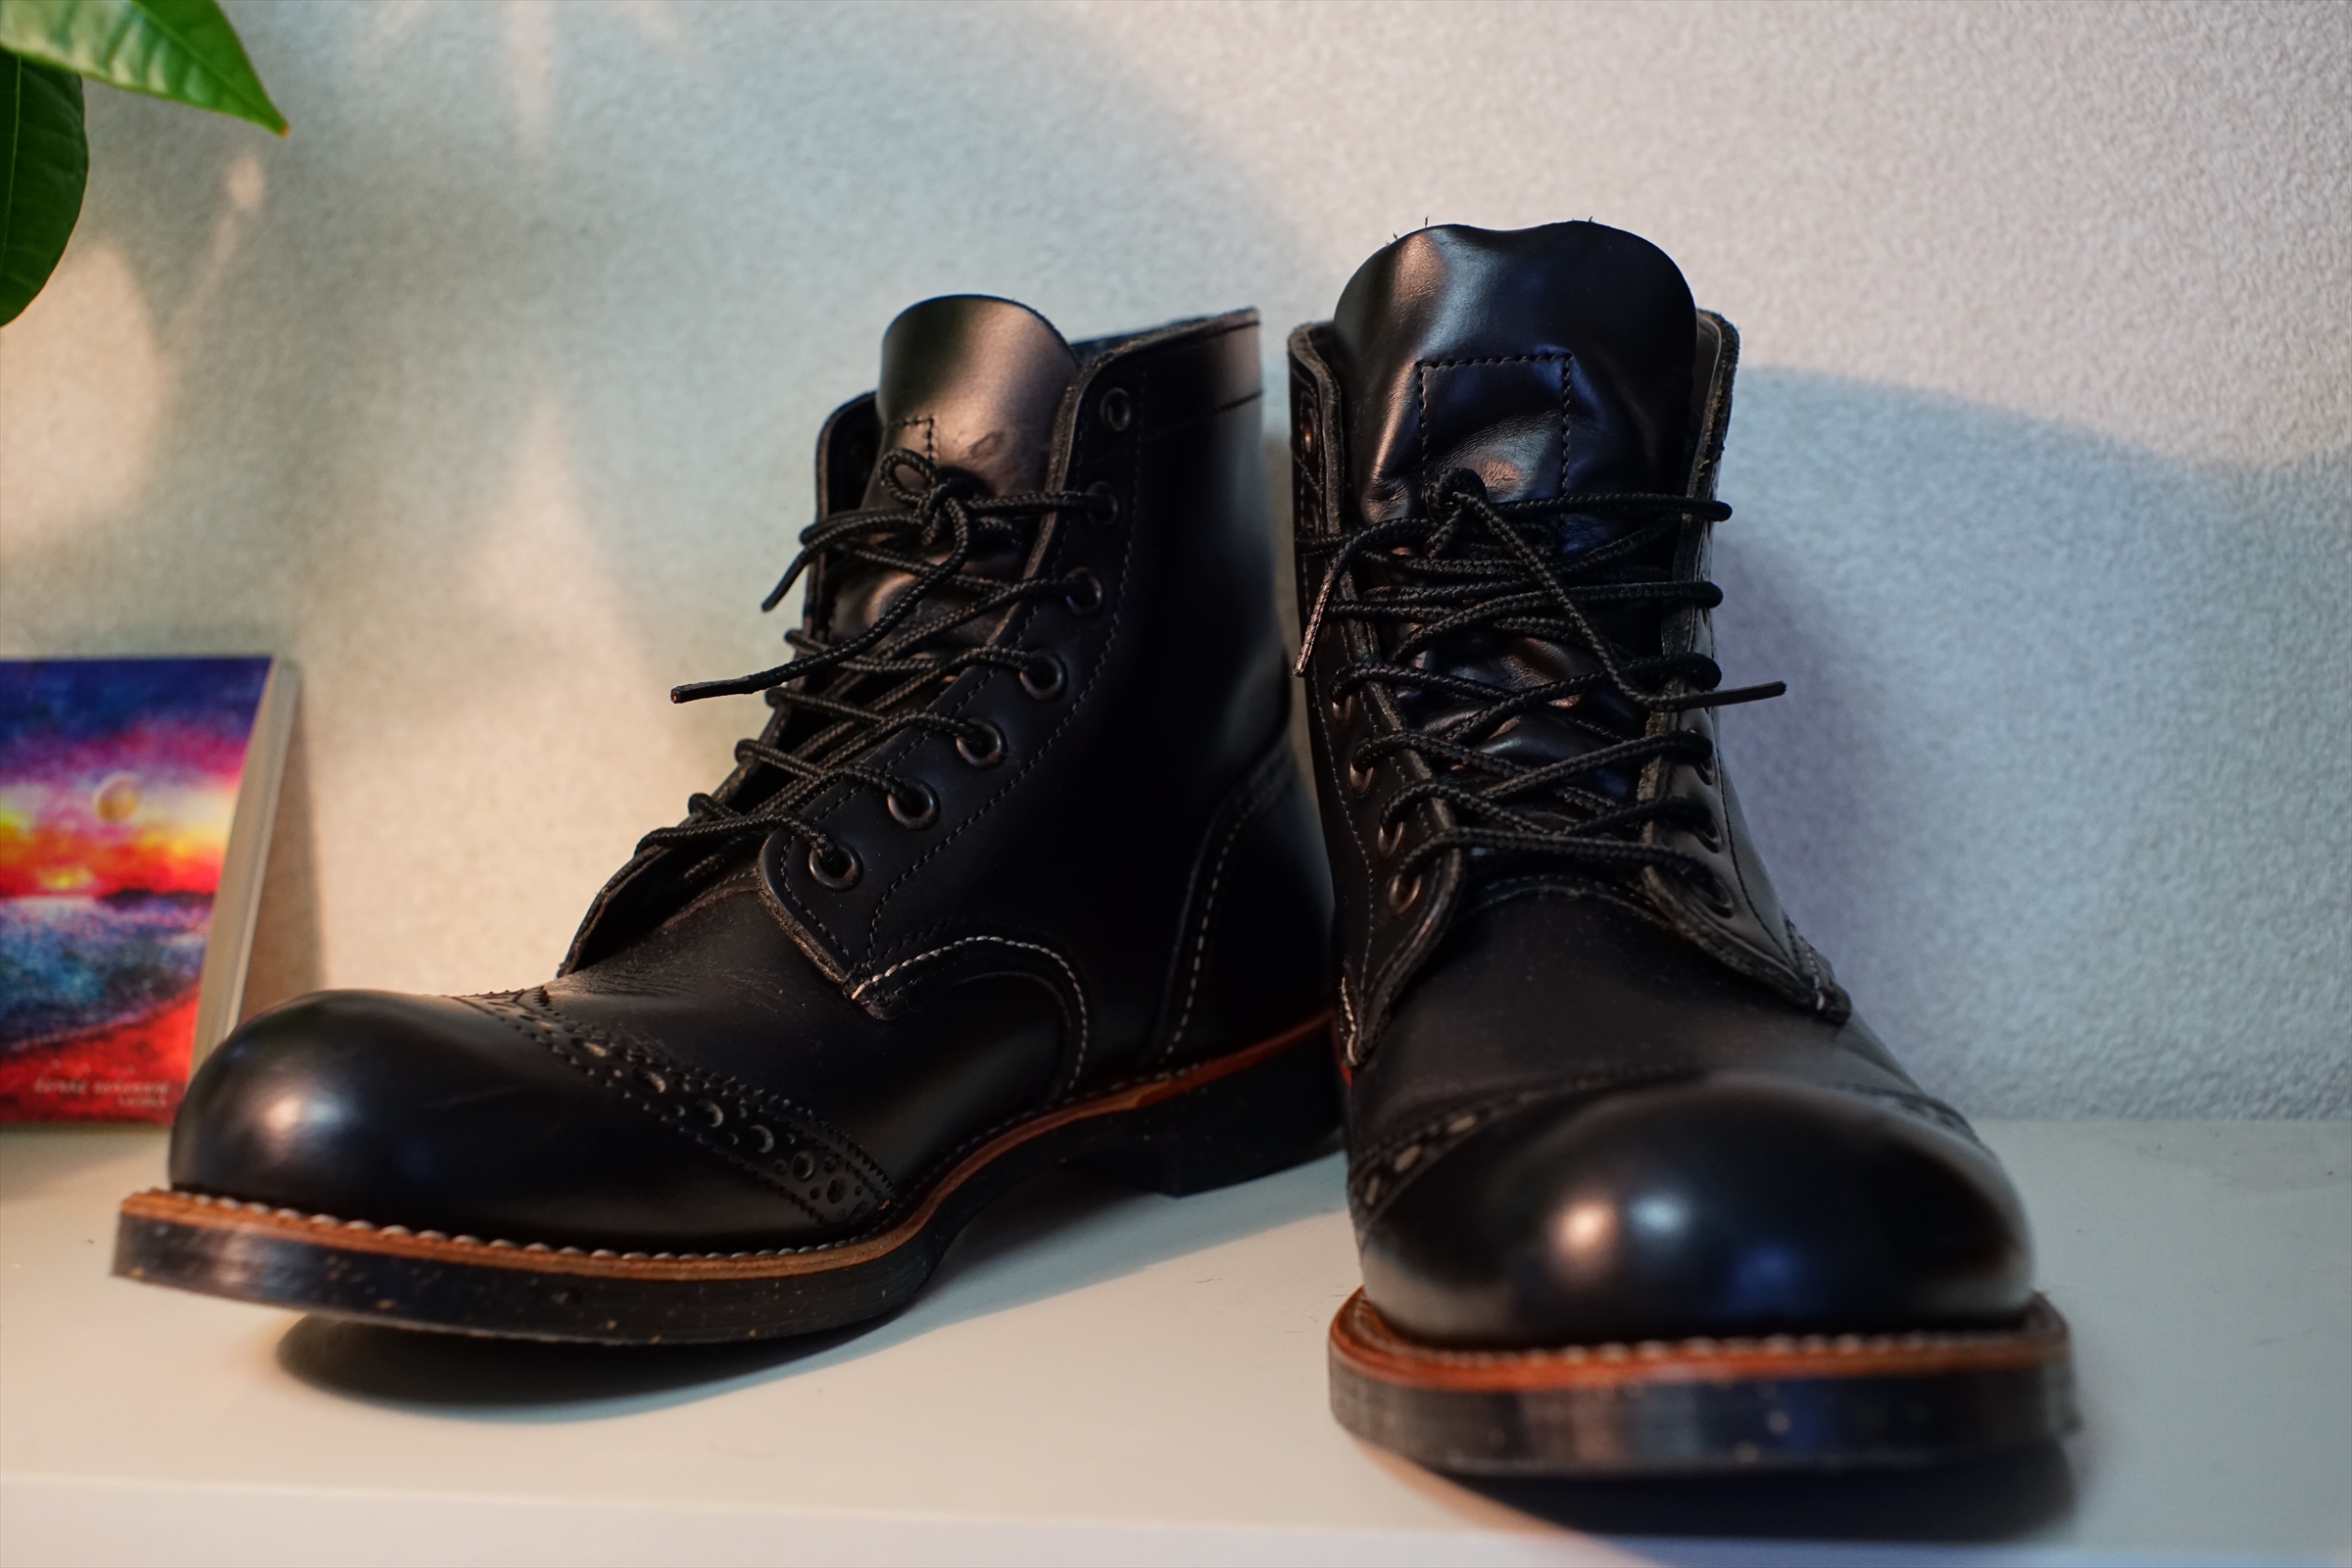 No Surprises |RED WING BROGUE RANGER BOOTS #8126